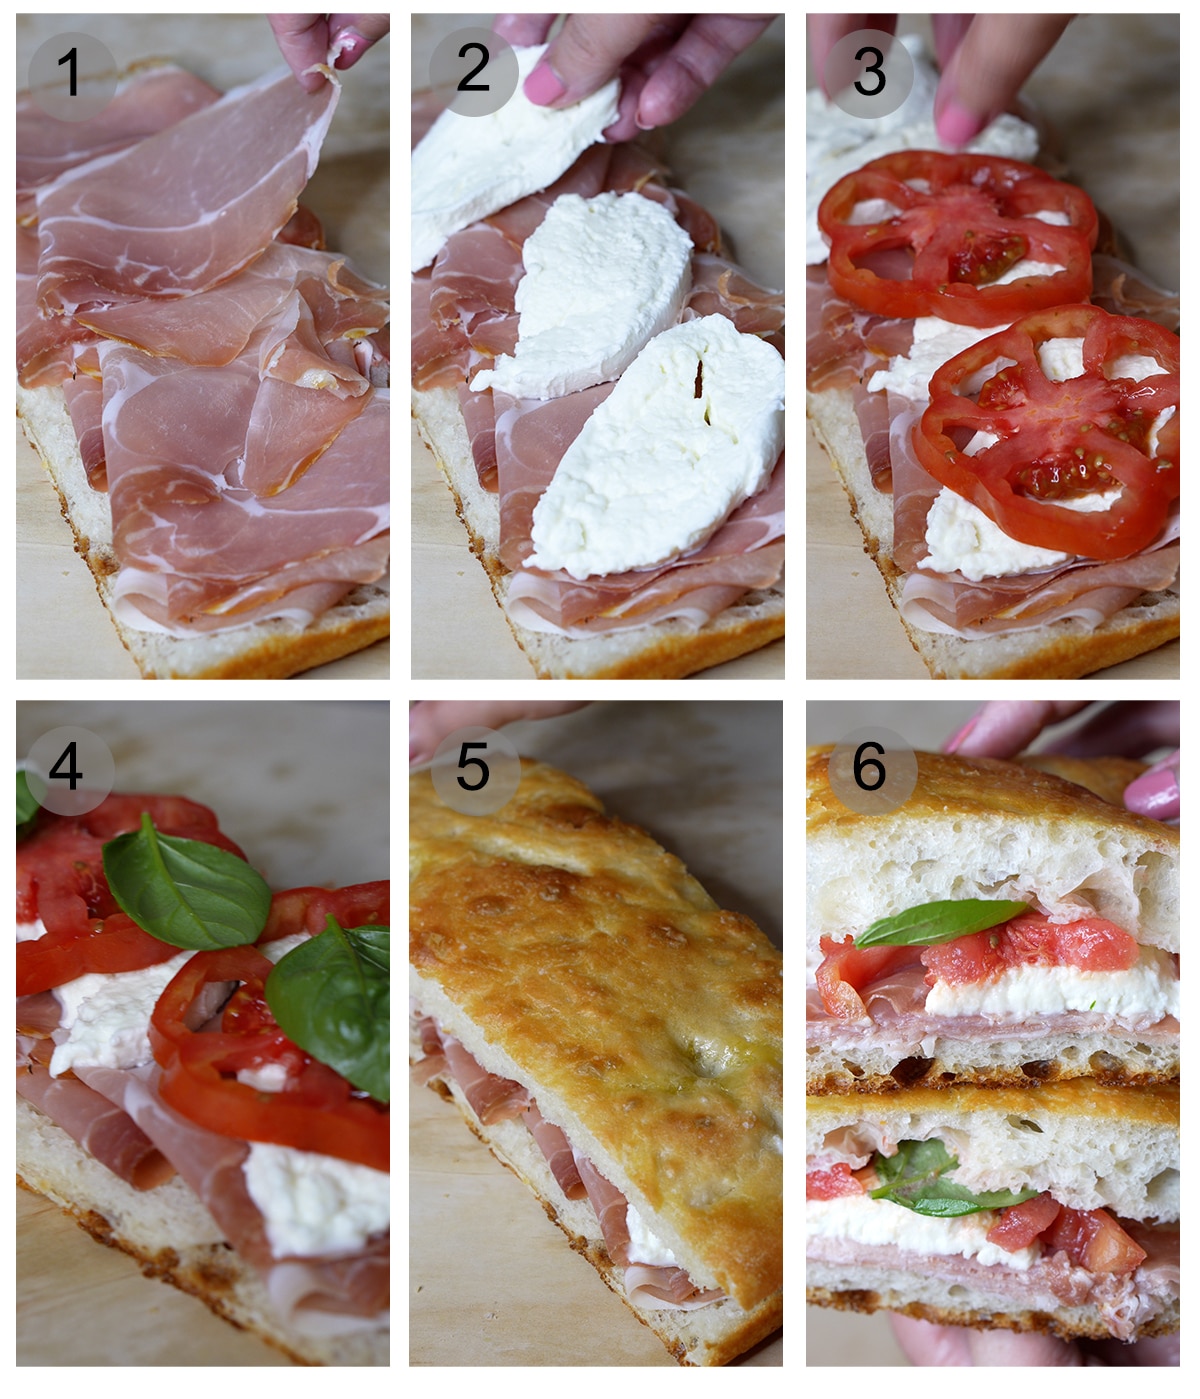 How to make a prosciutto sandwich - step by step